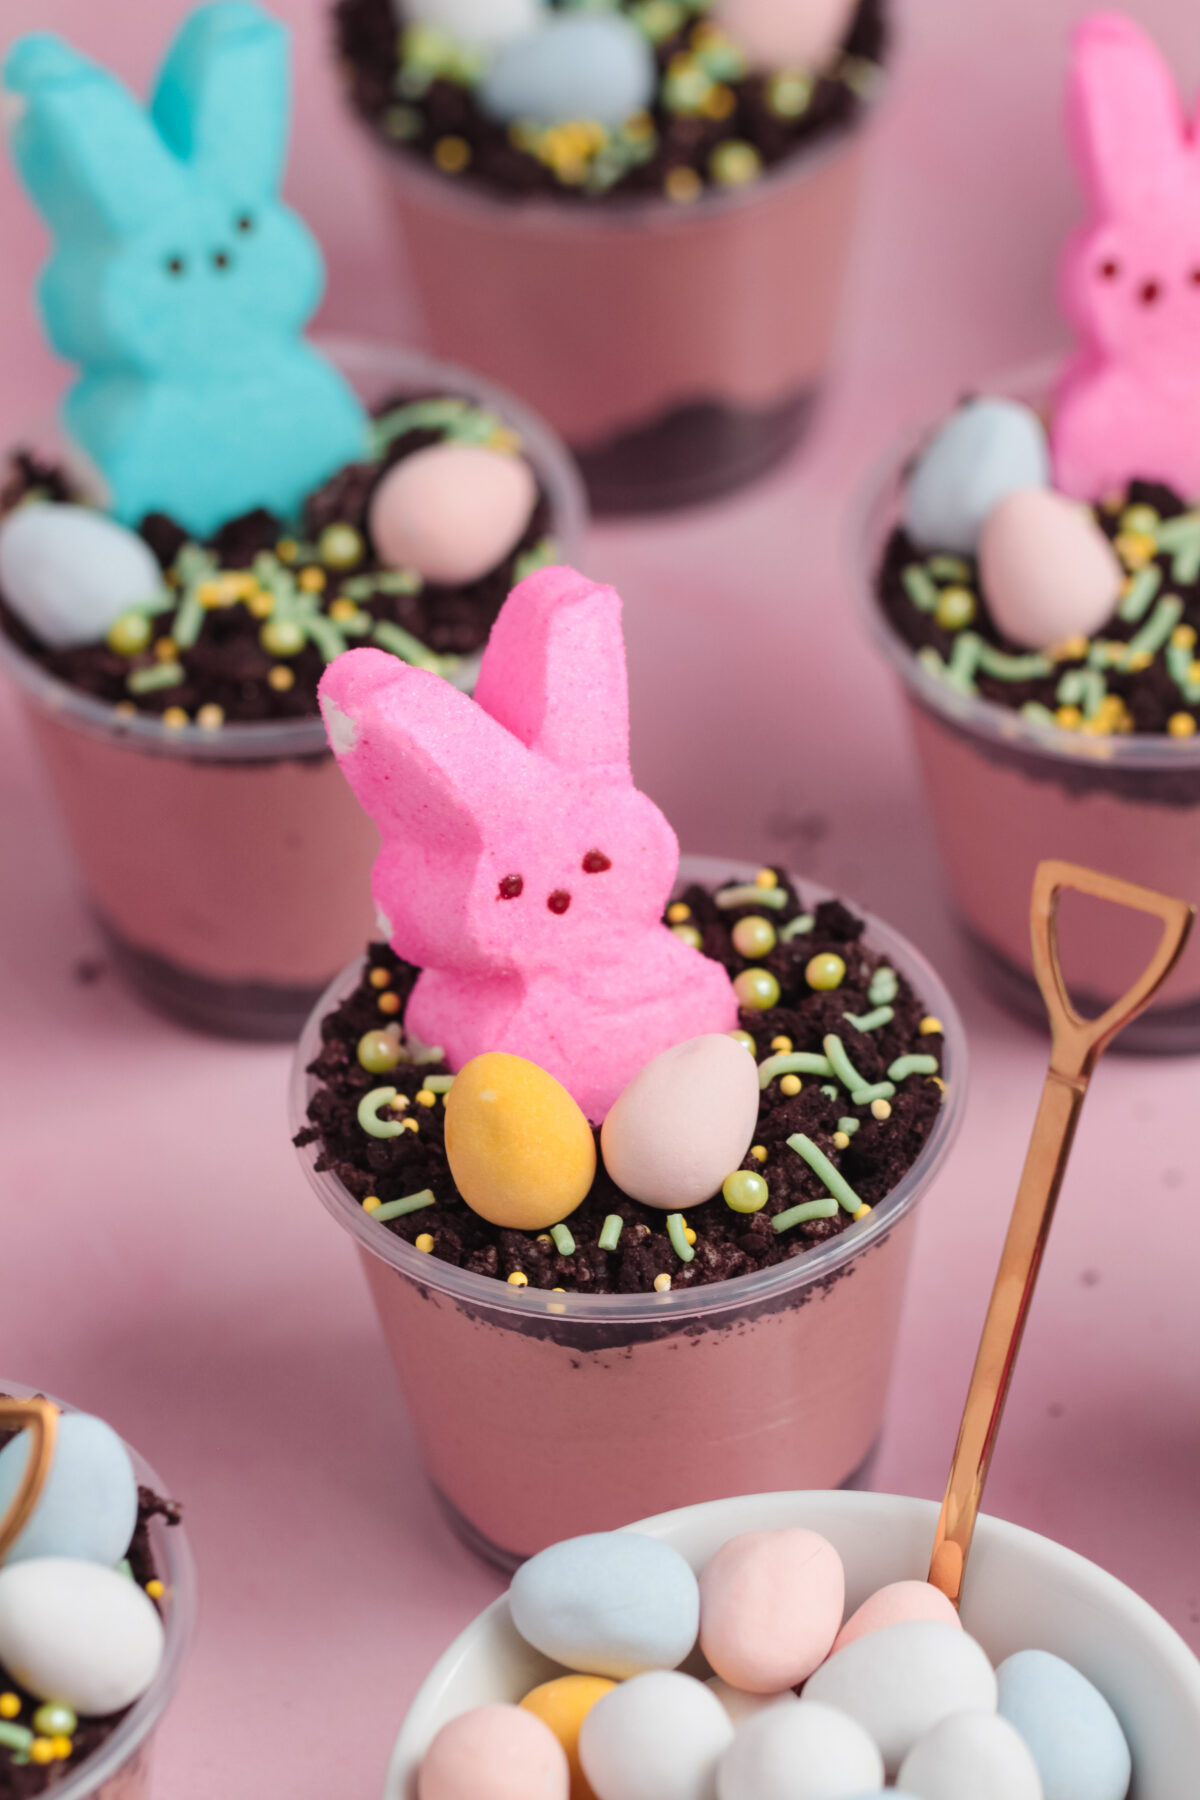 This fun and easy Easter Dirt Cups recipe features a velvety chocolate cheesecake filling, oreo crumbs, and adorable peeps bunnies!